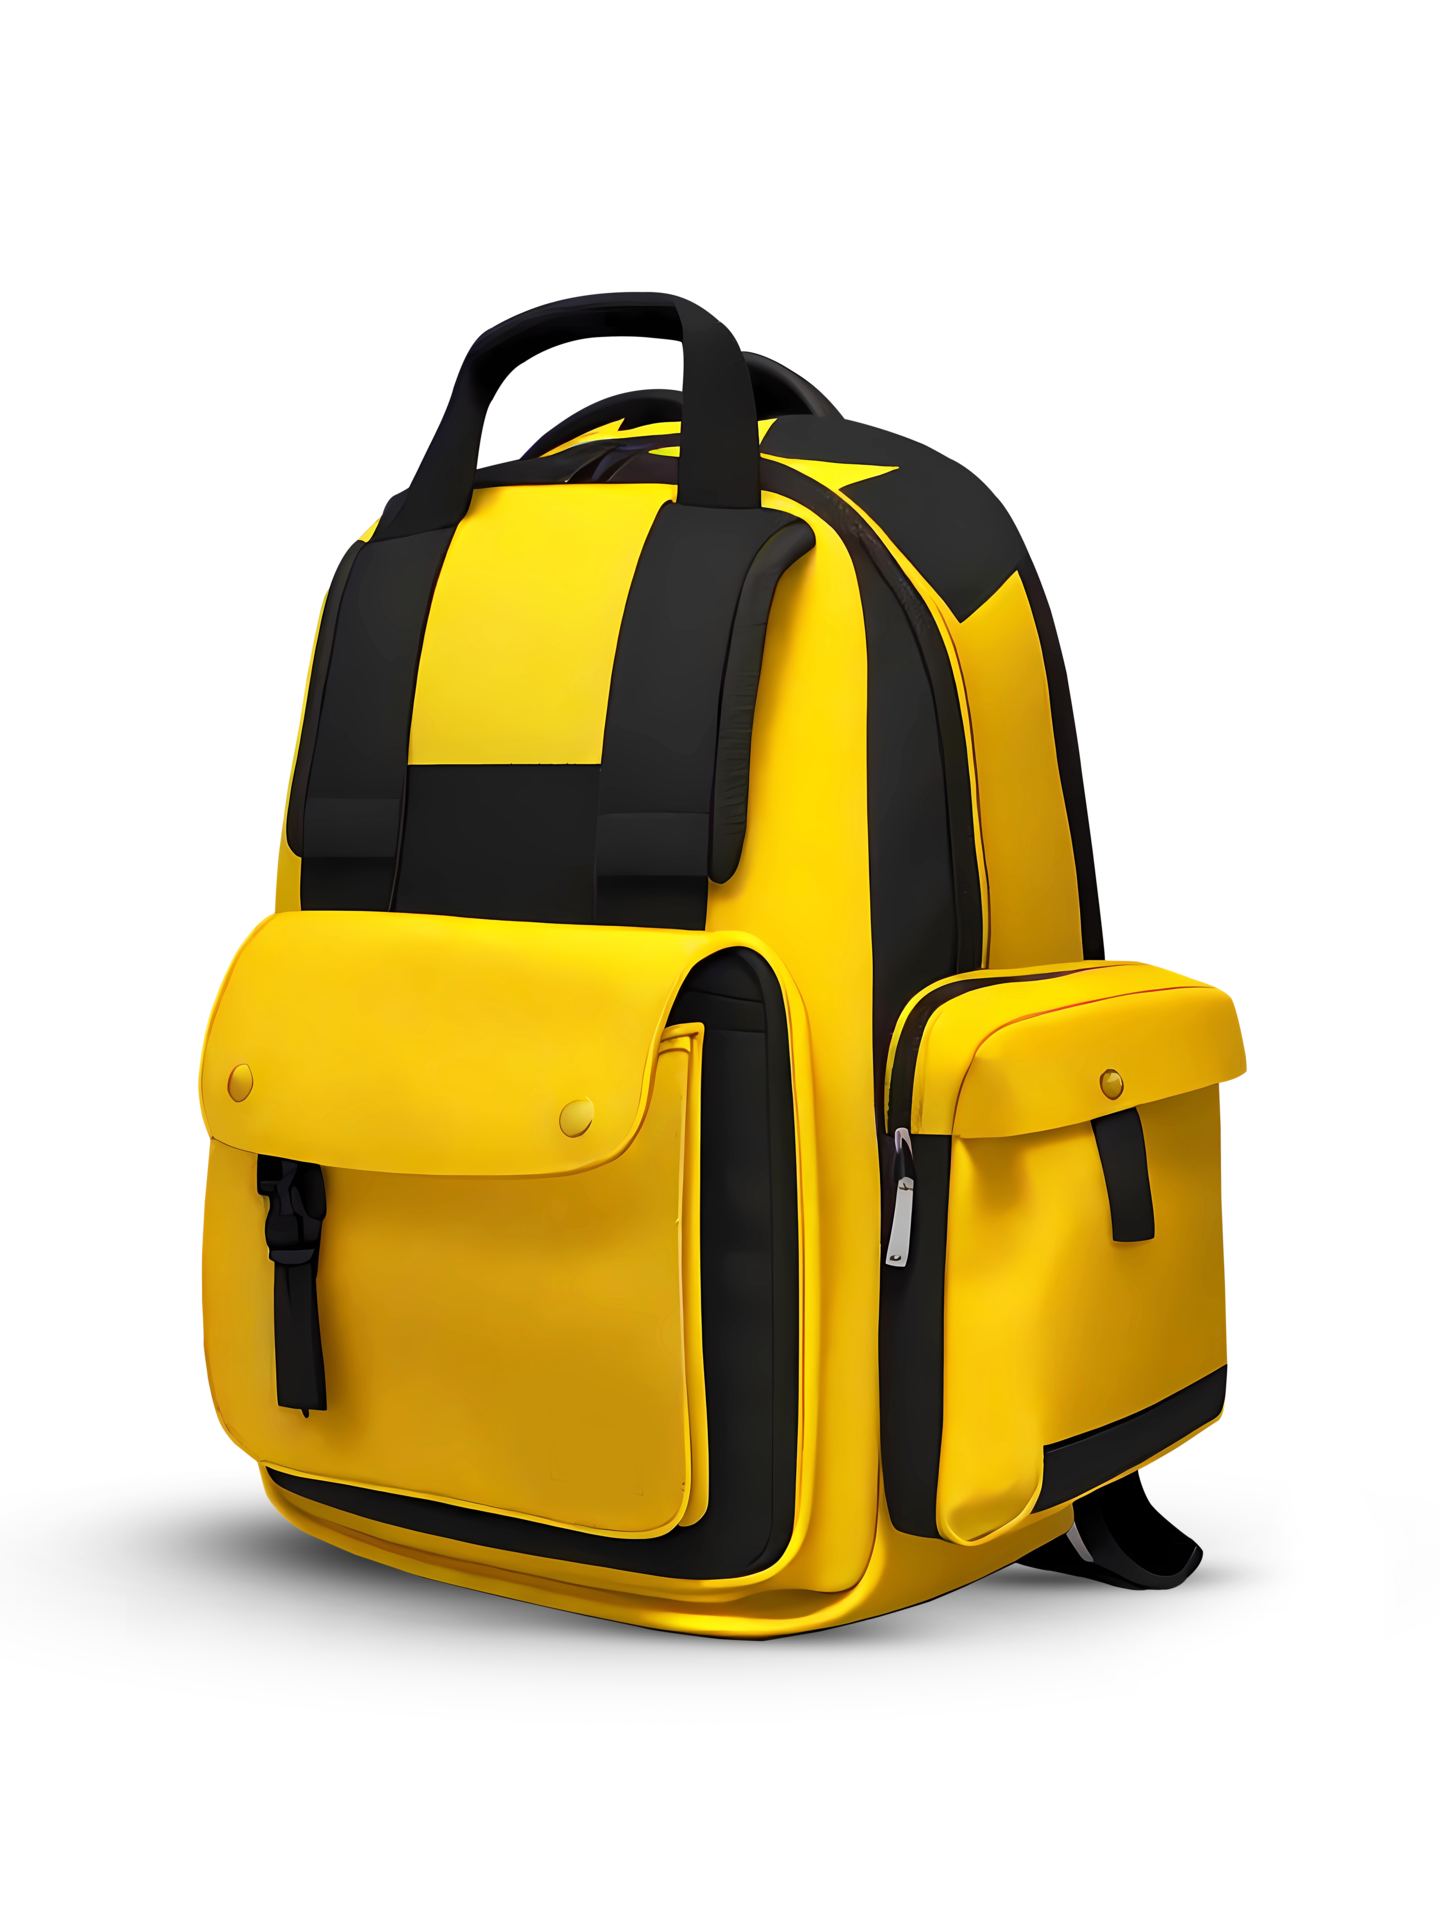 3D Rendering Yellow Backpack 25782589 PNG